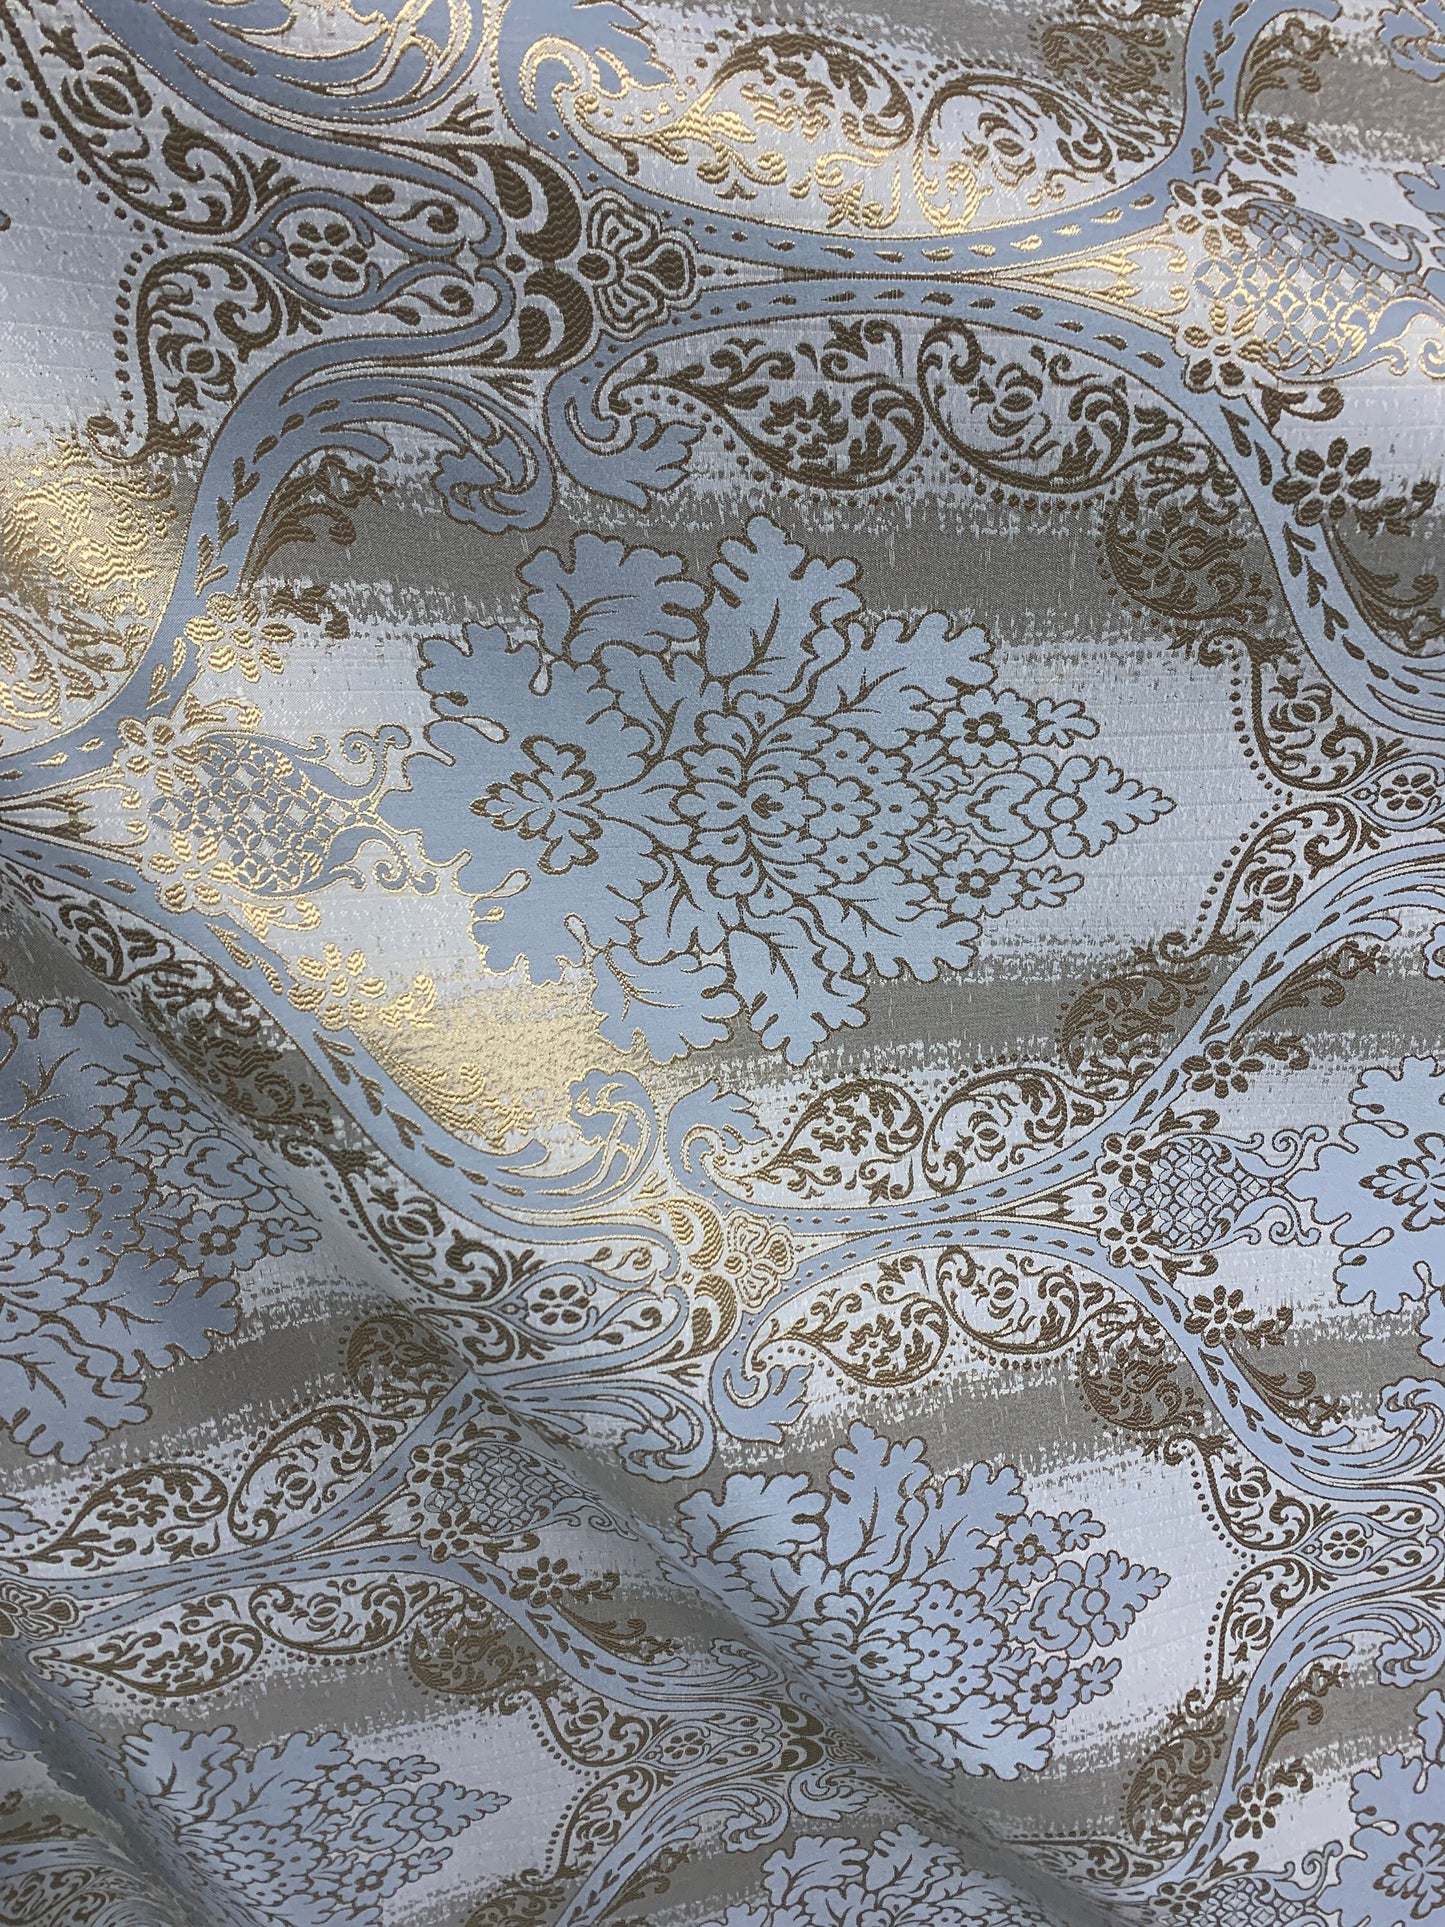 BLUE GOLD Damask Brocade Upholstery Drapery Fabric (110 in.) Sold By The Yard